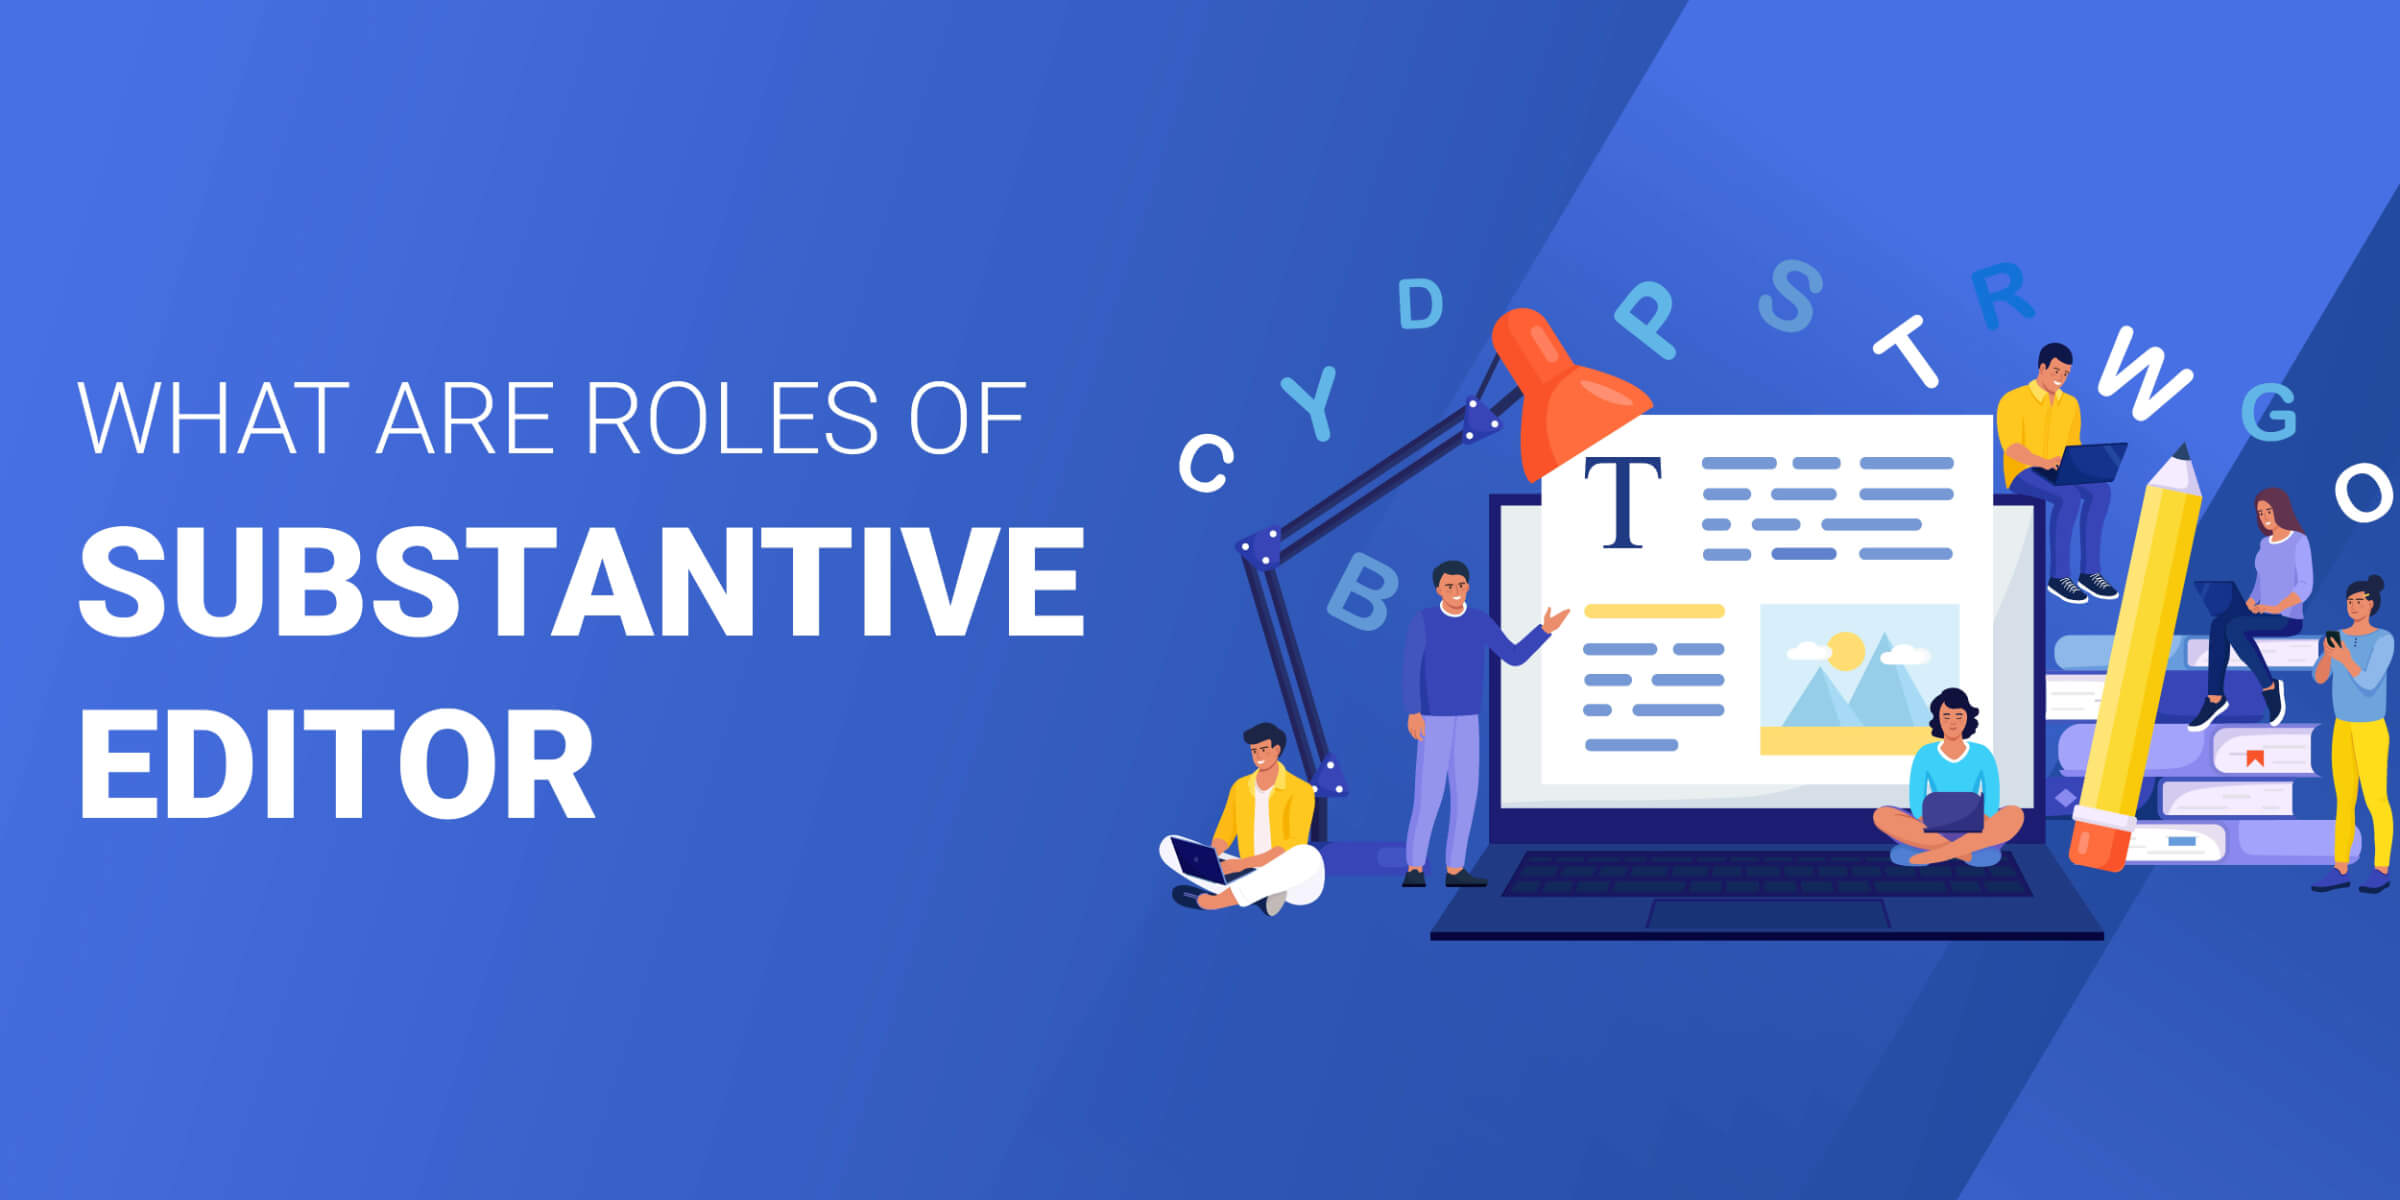 What Are Roles of Substantive Editor